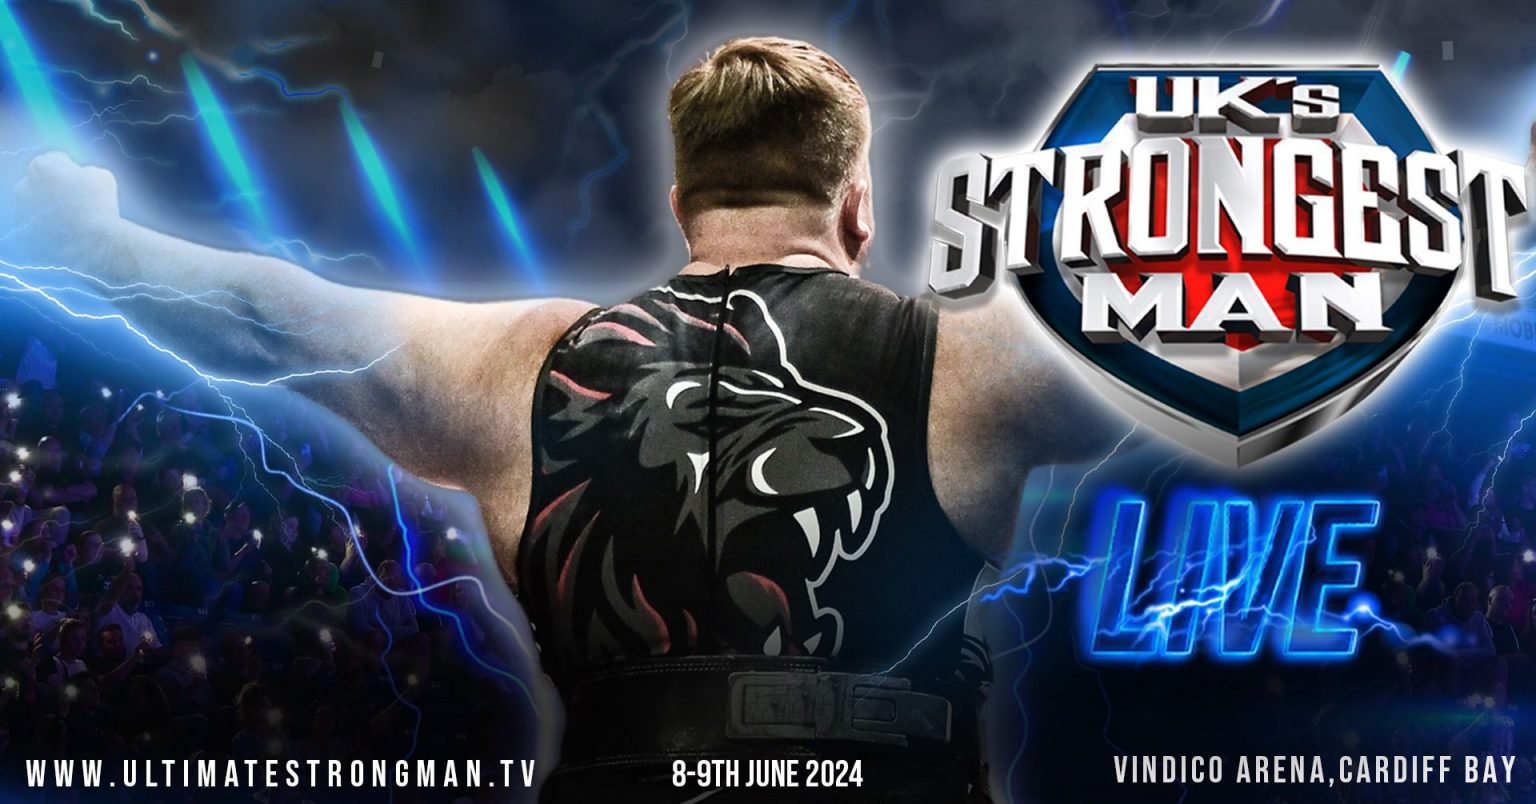 Ultimate Strongman » UK’s Strongest Man 2024 Where to buy tickets!